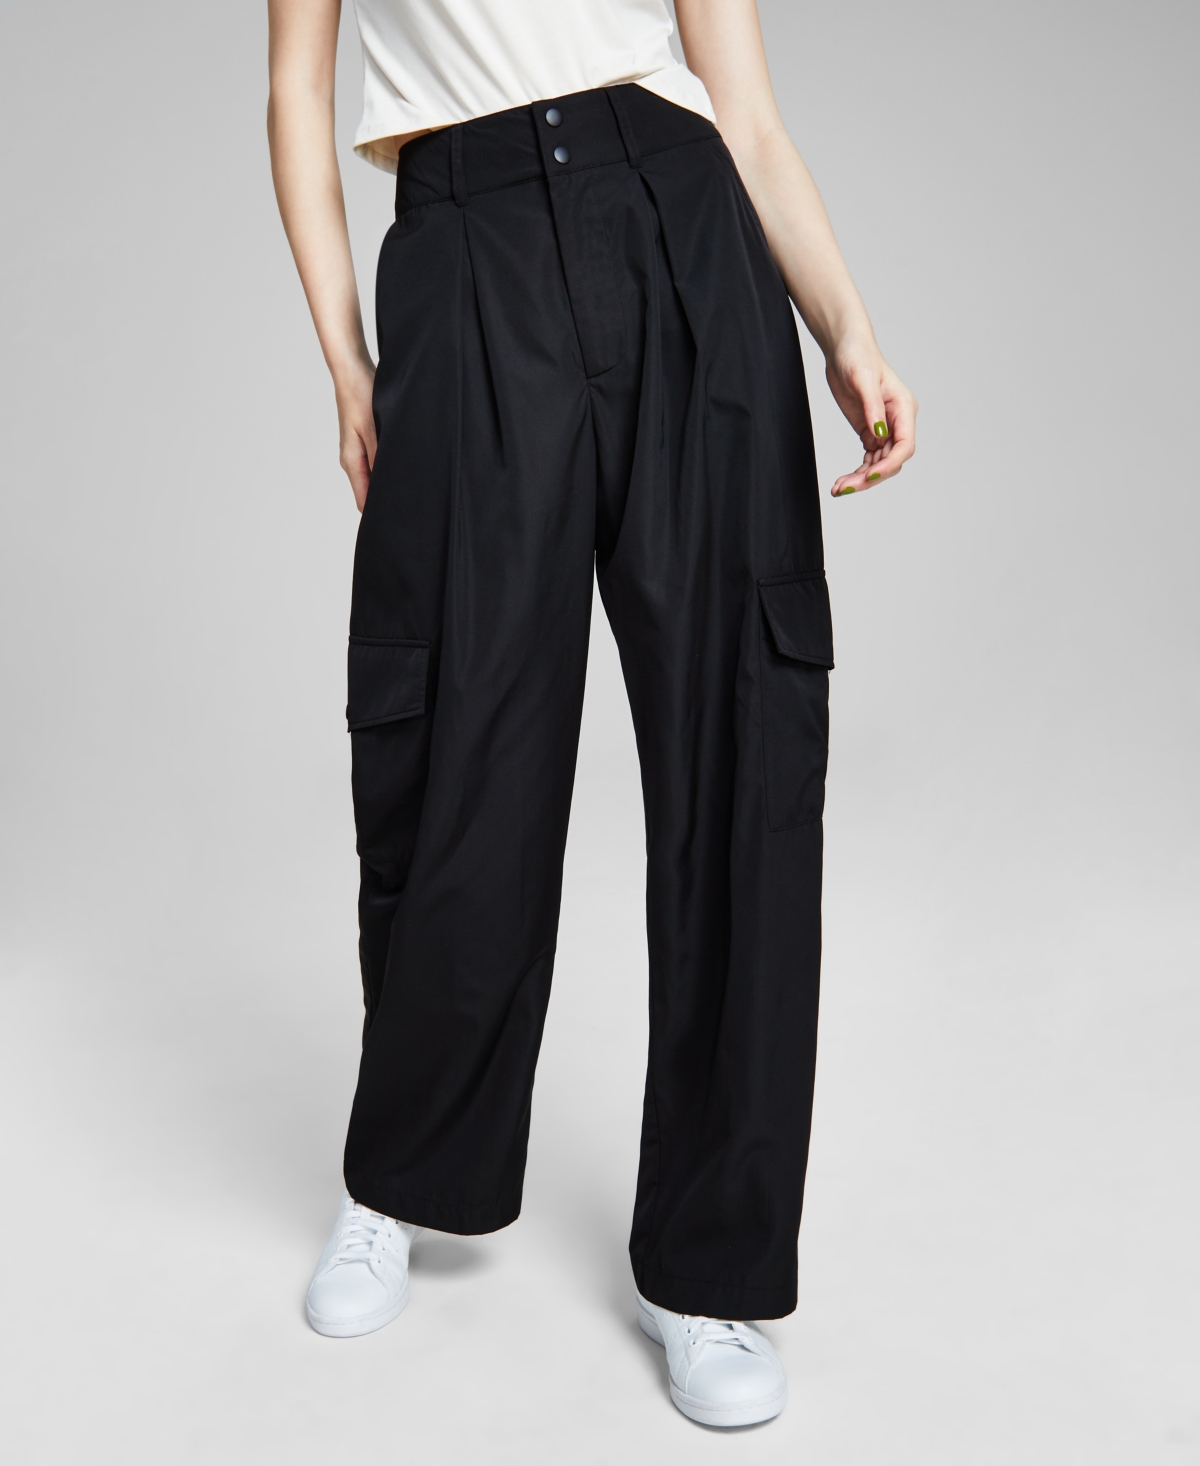 AND NOW THIS WOMEN'S HIGH-RISE NYLON WIDE-LEG CARGO PANTS